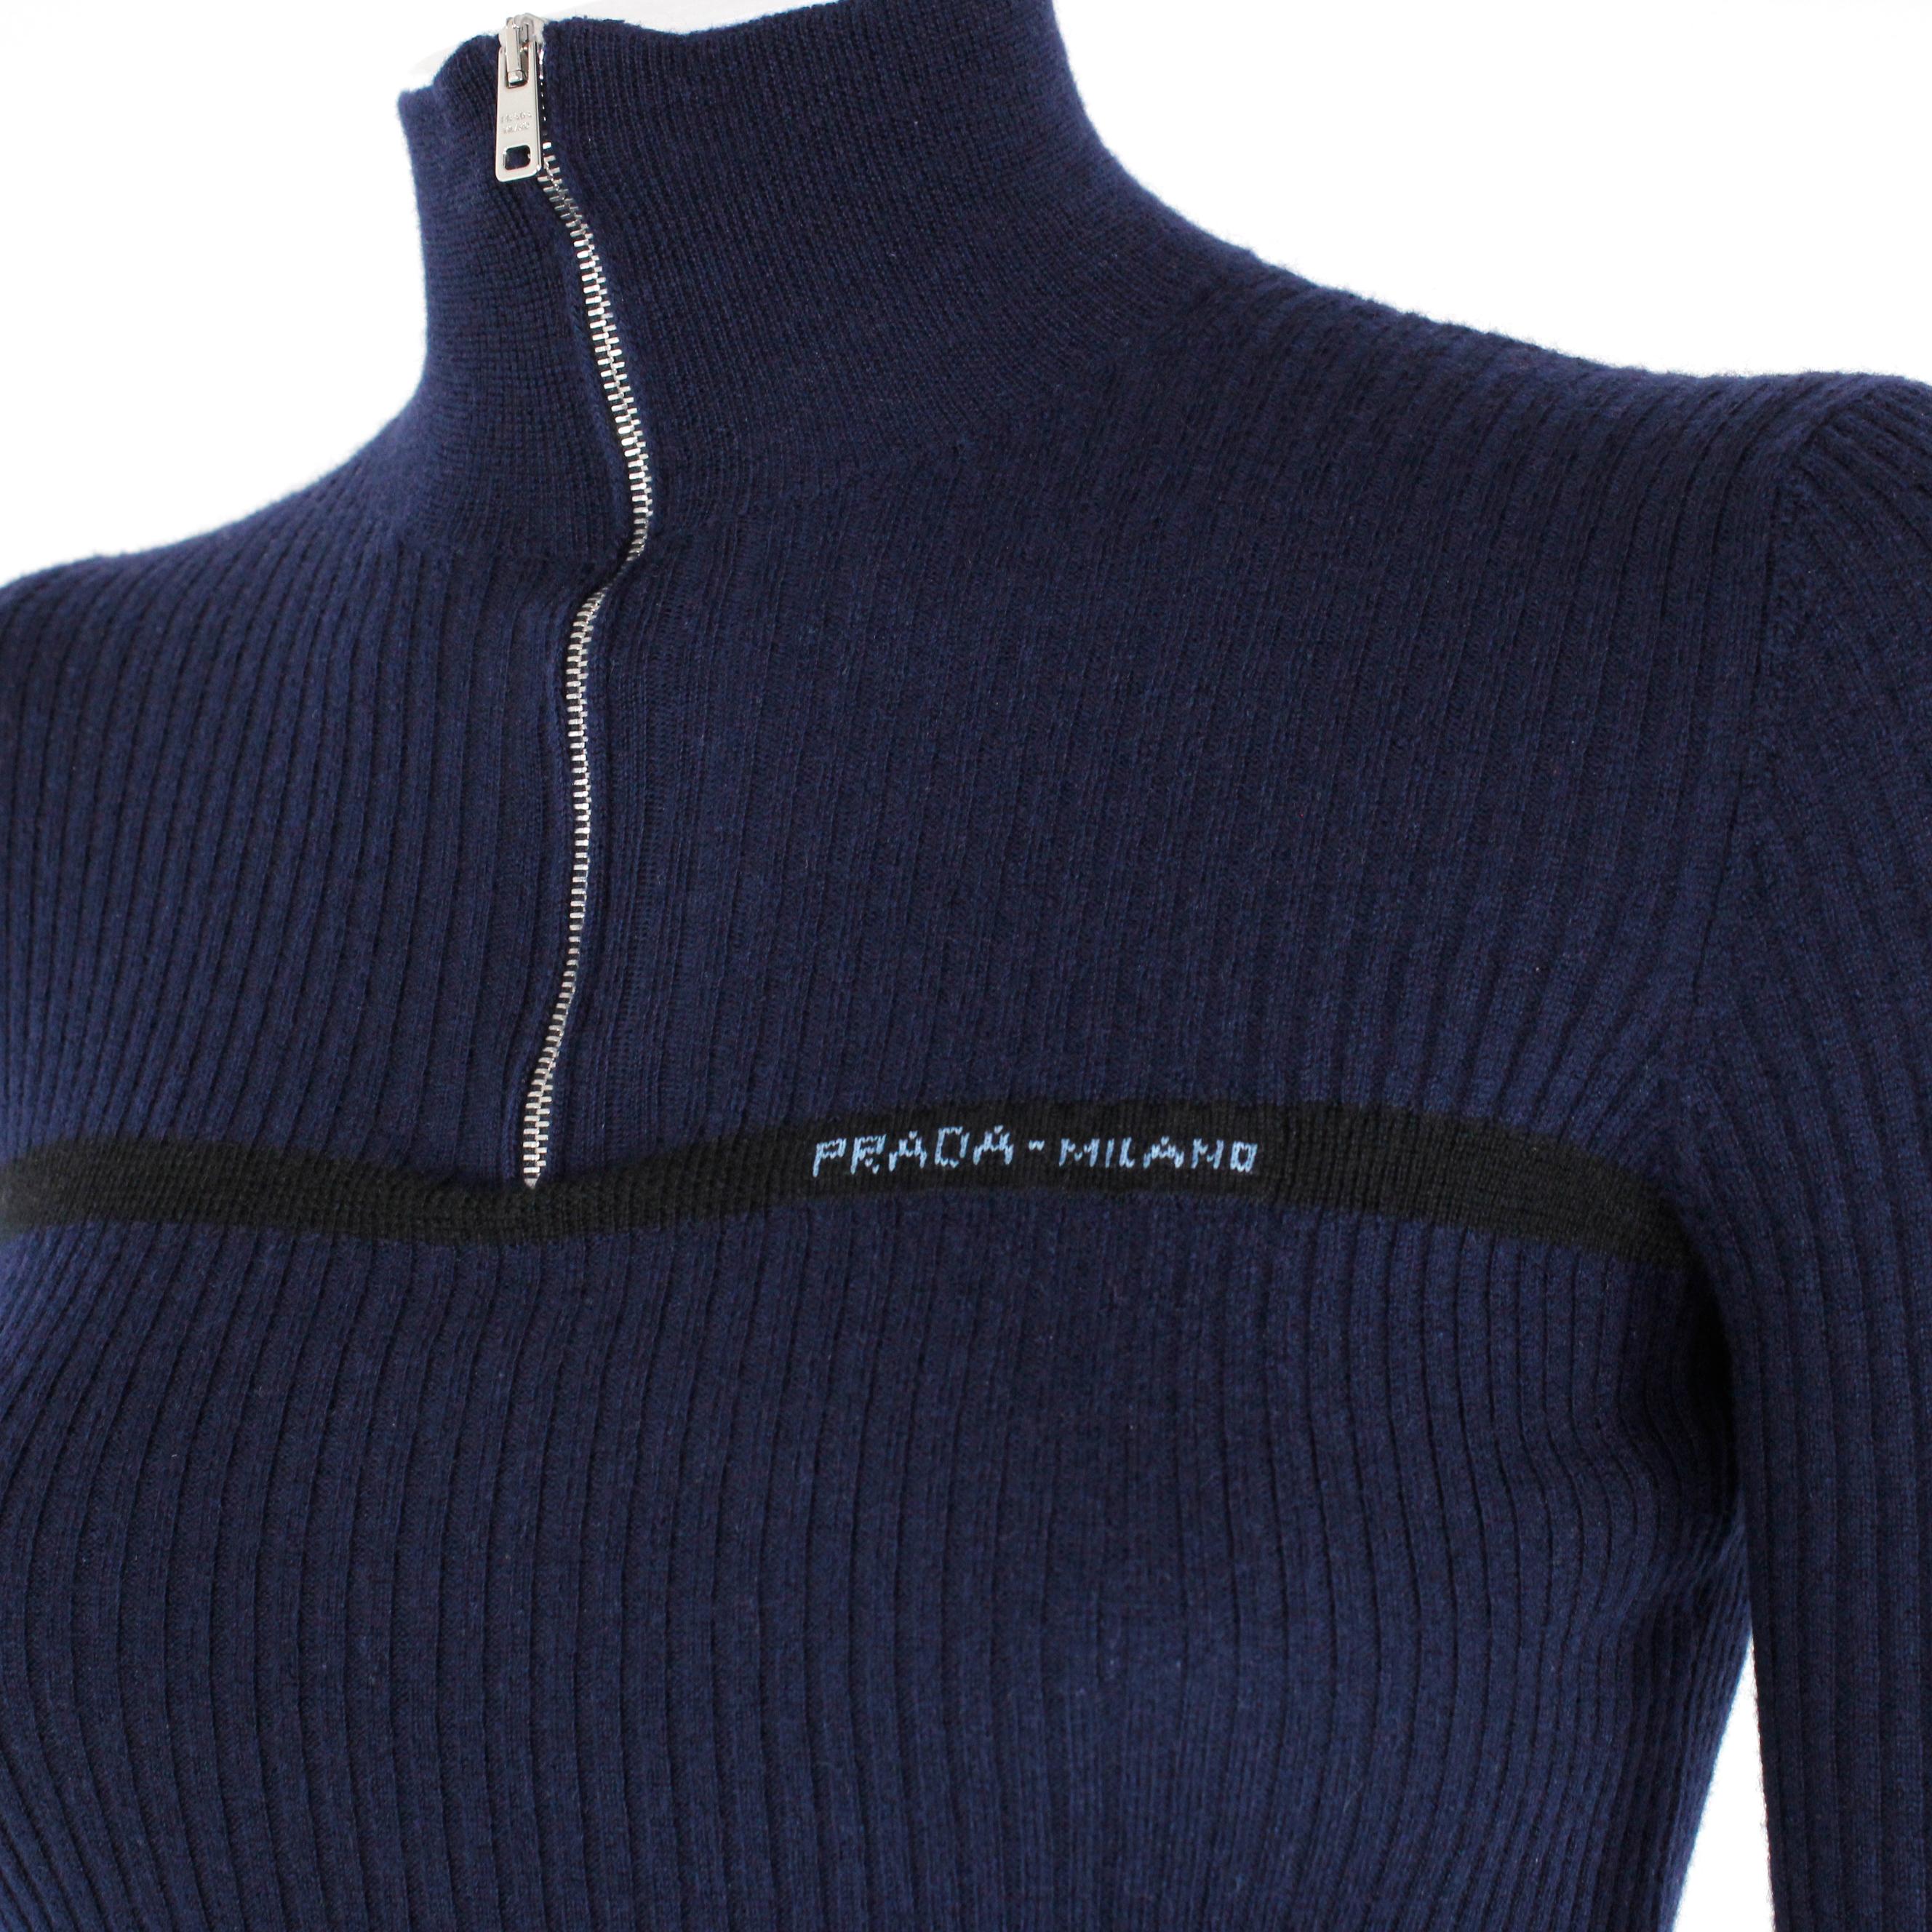 Prada Wool Dress  In Excellent Condition For Sale In Bressanone, IT